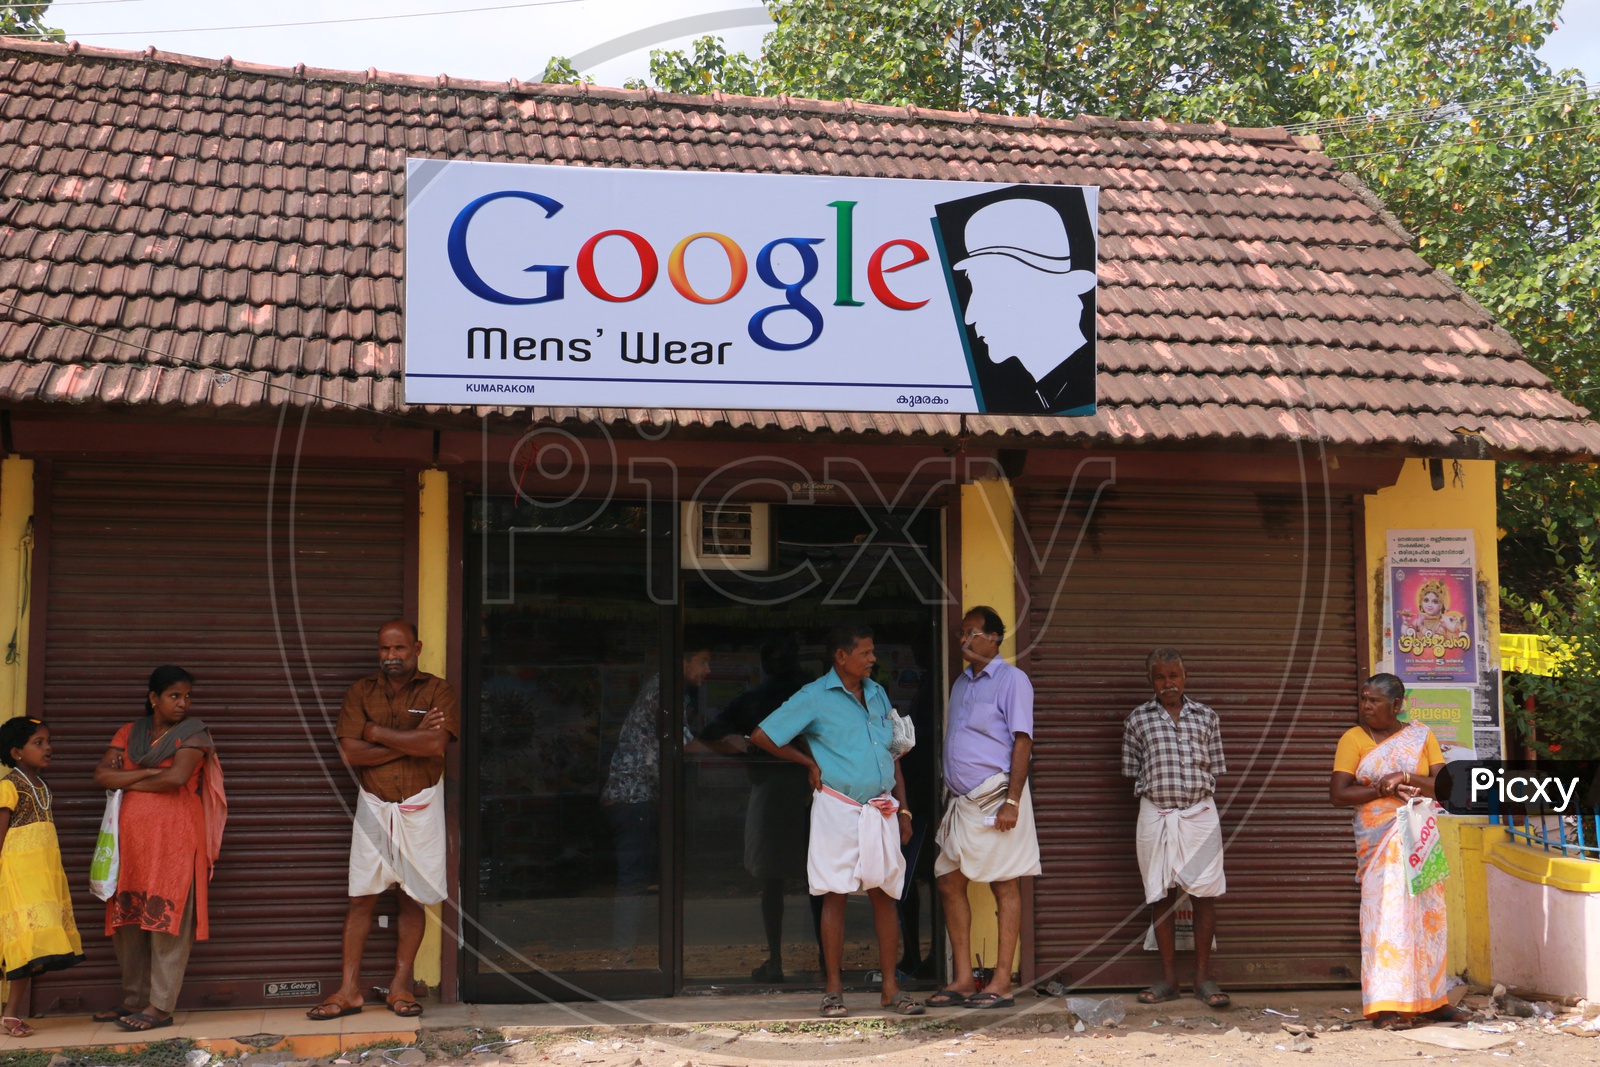 Mens Wear store name after the famous brand Google